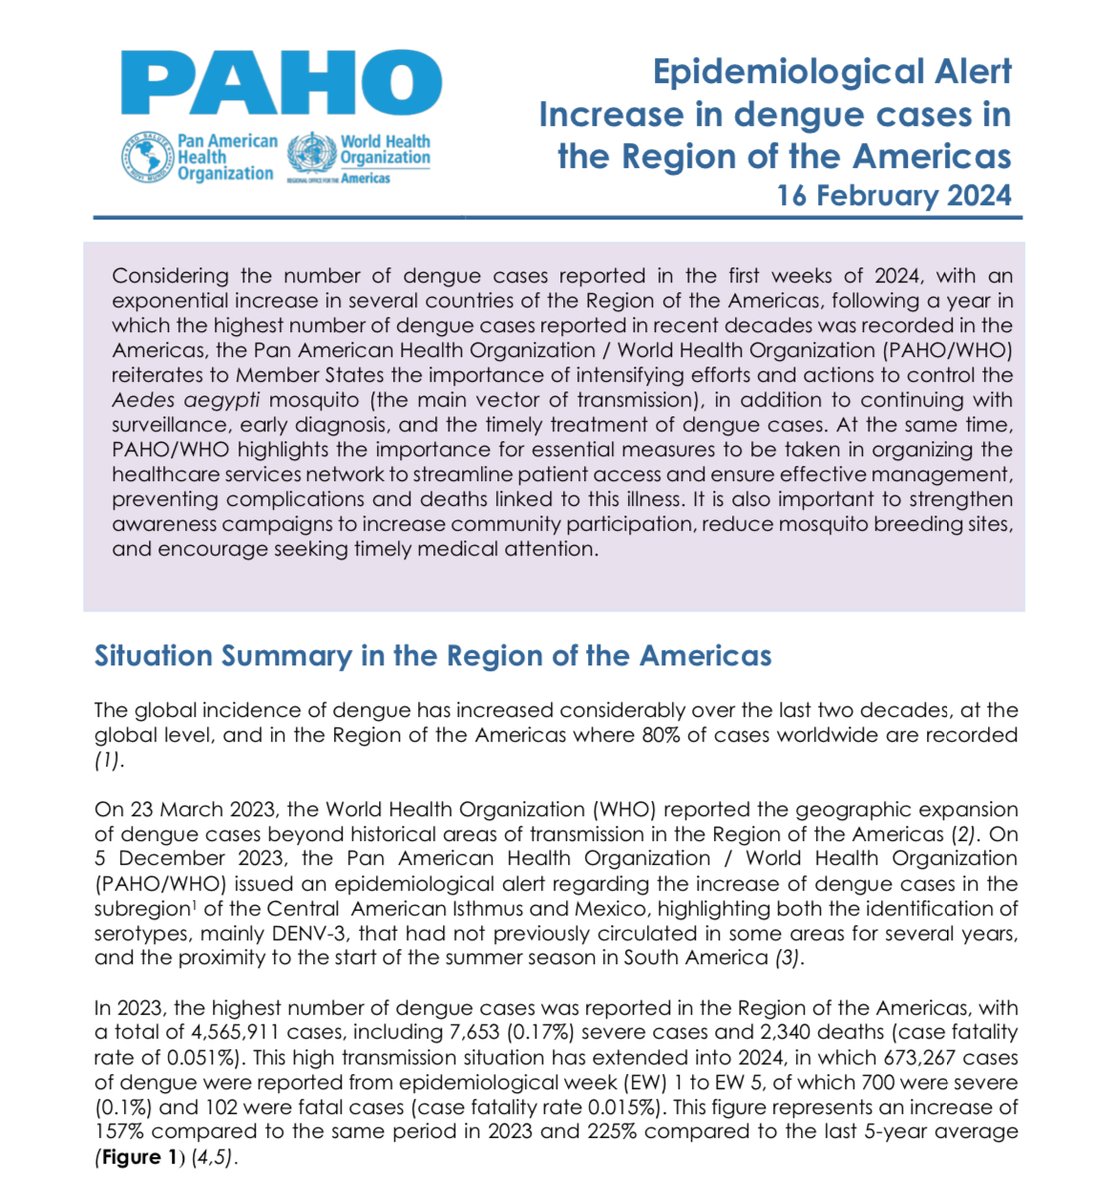 Epidemiological Alert @pahowho - Increase in #dengue cases in the Region of the Americas - 16 February 2024 paho.org/es/documentos/…